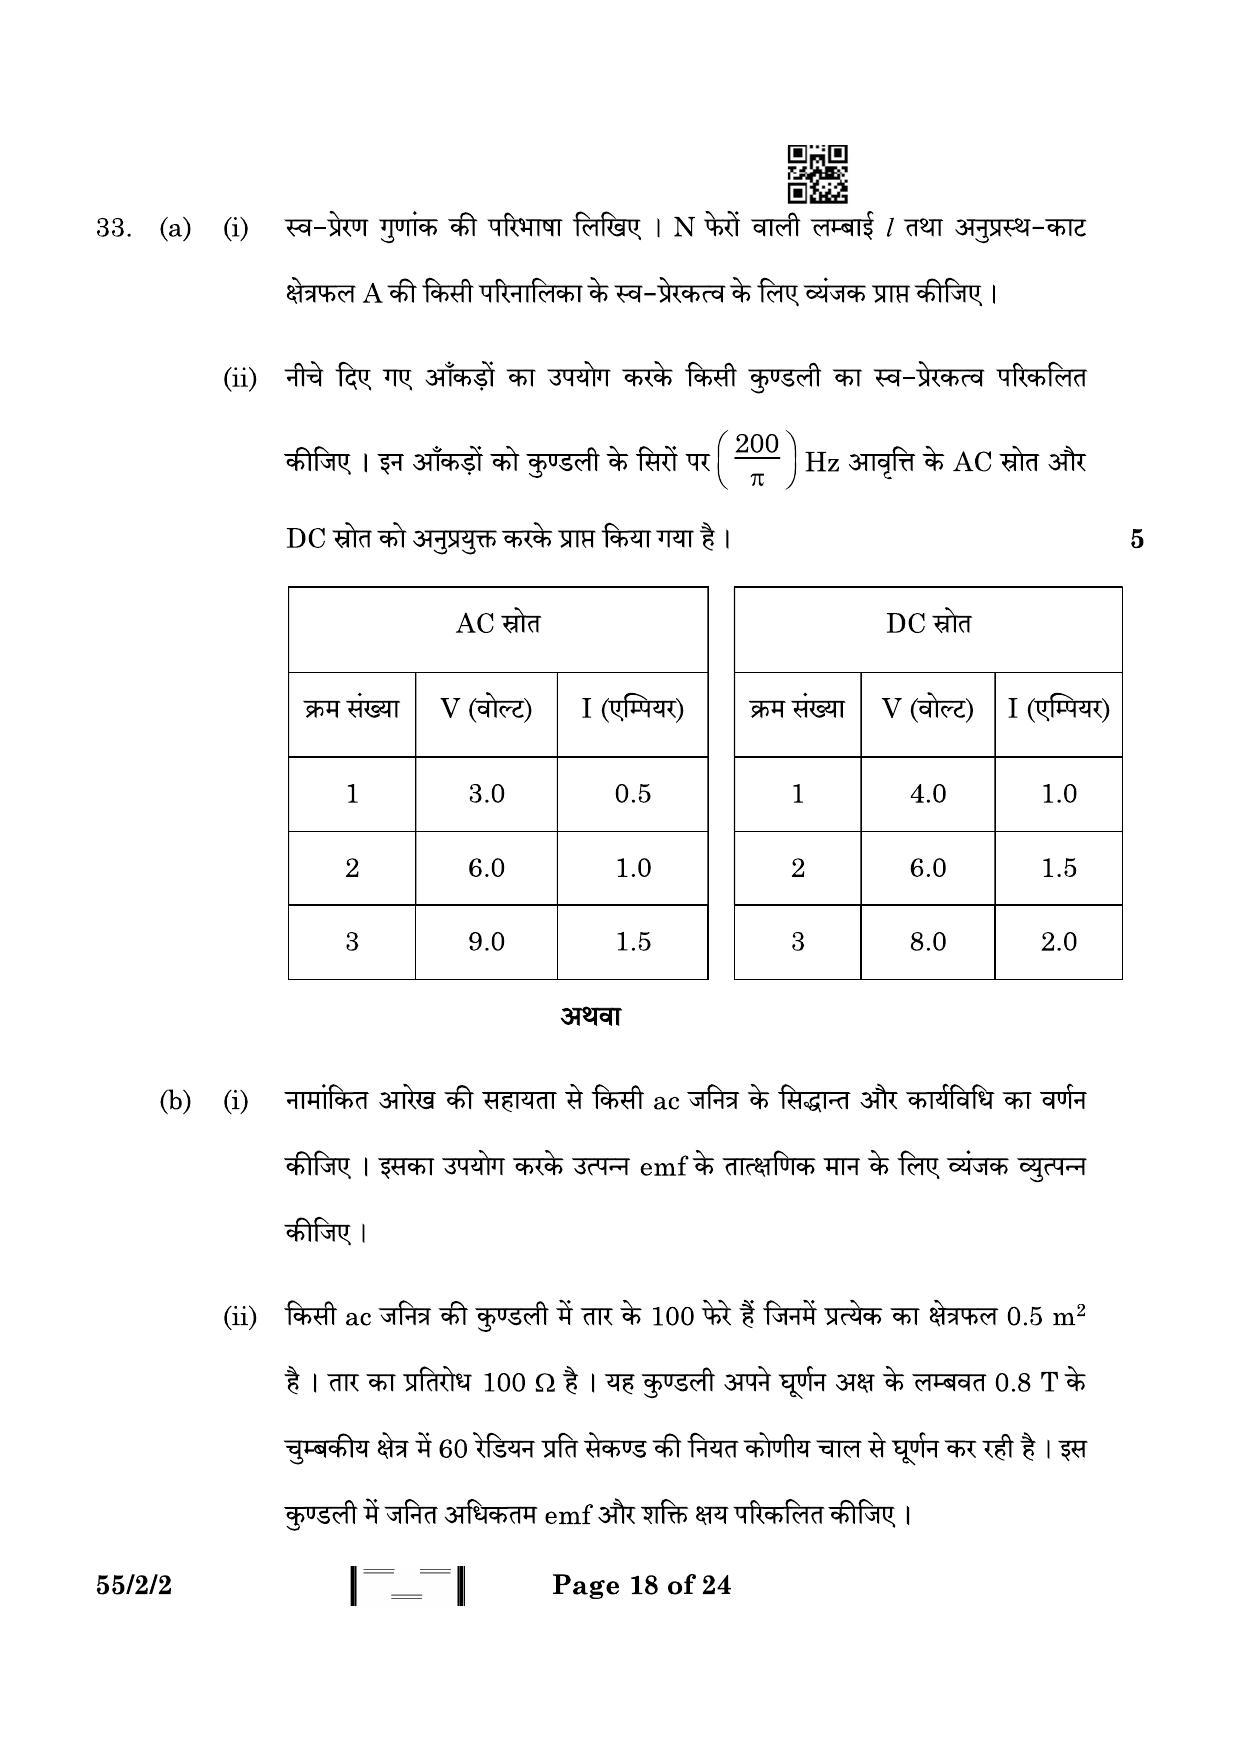 CBSE Class 12 55-2-2 Physics 2023 Question Paper - Page 18